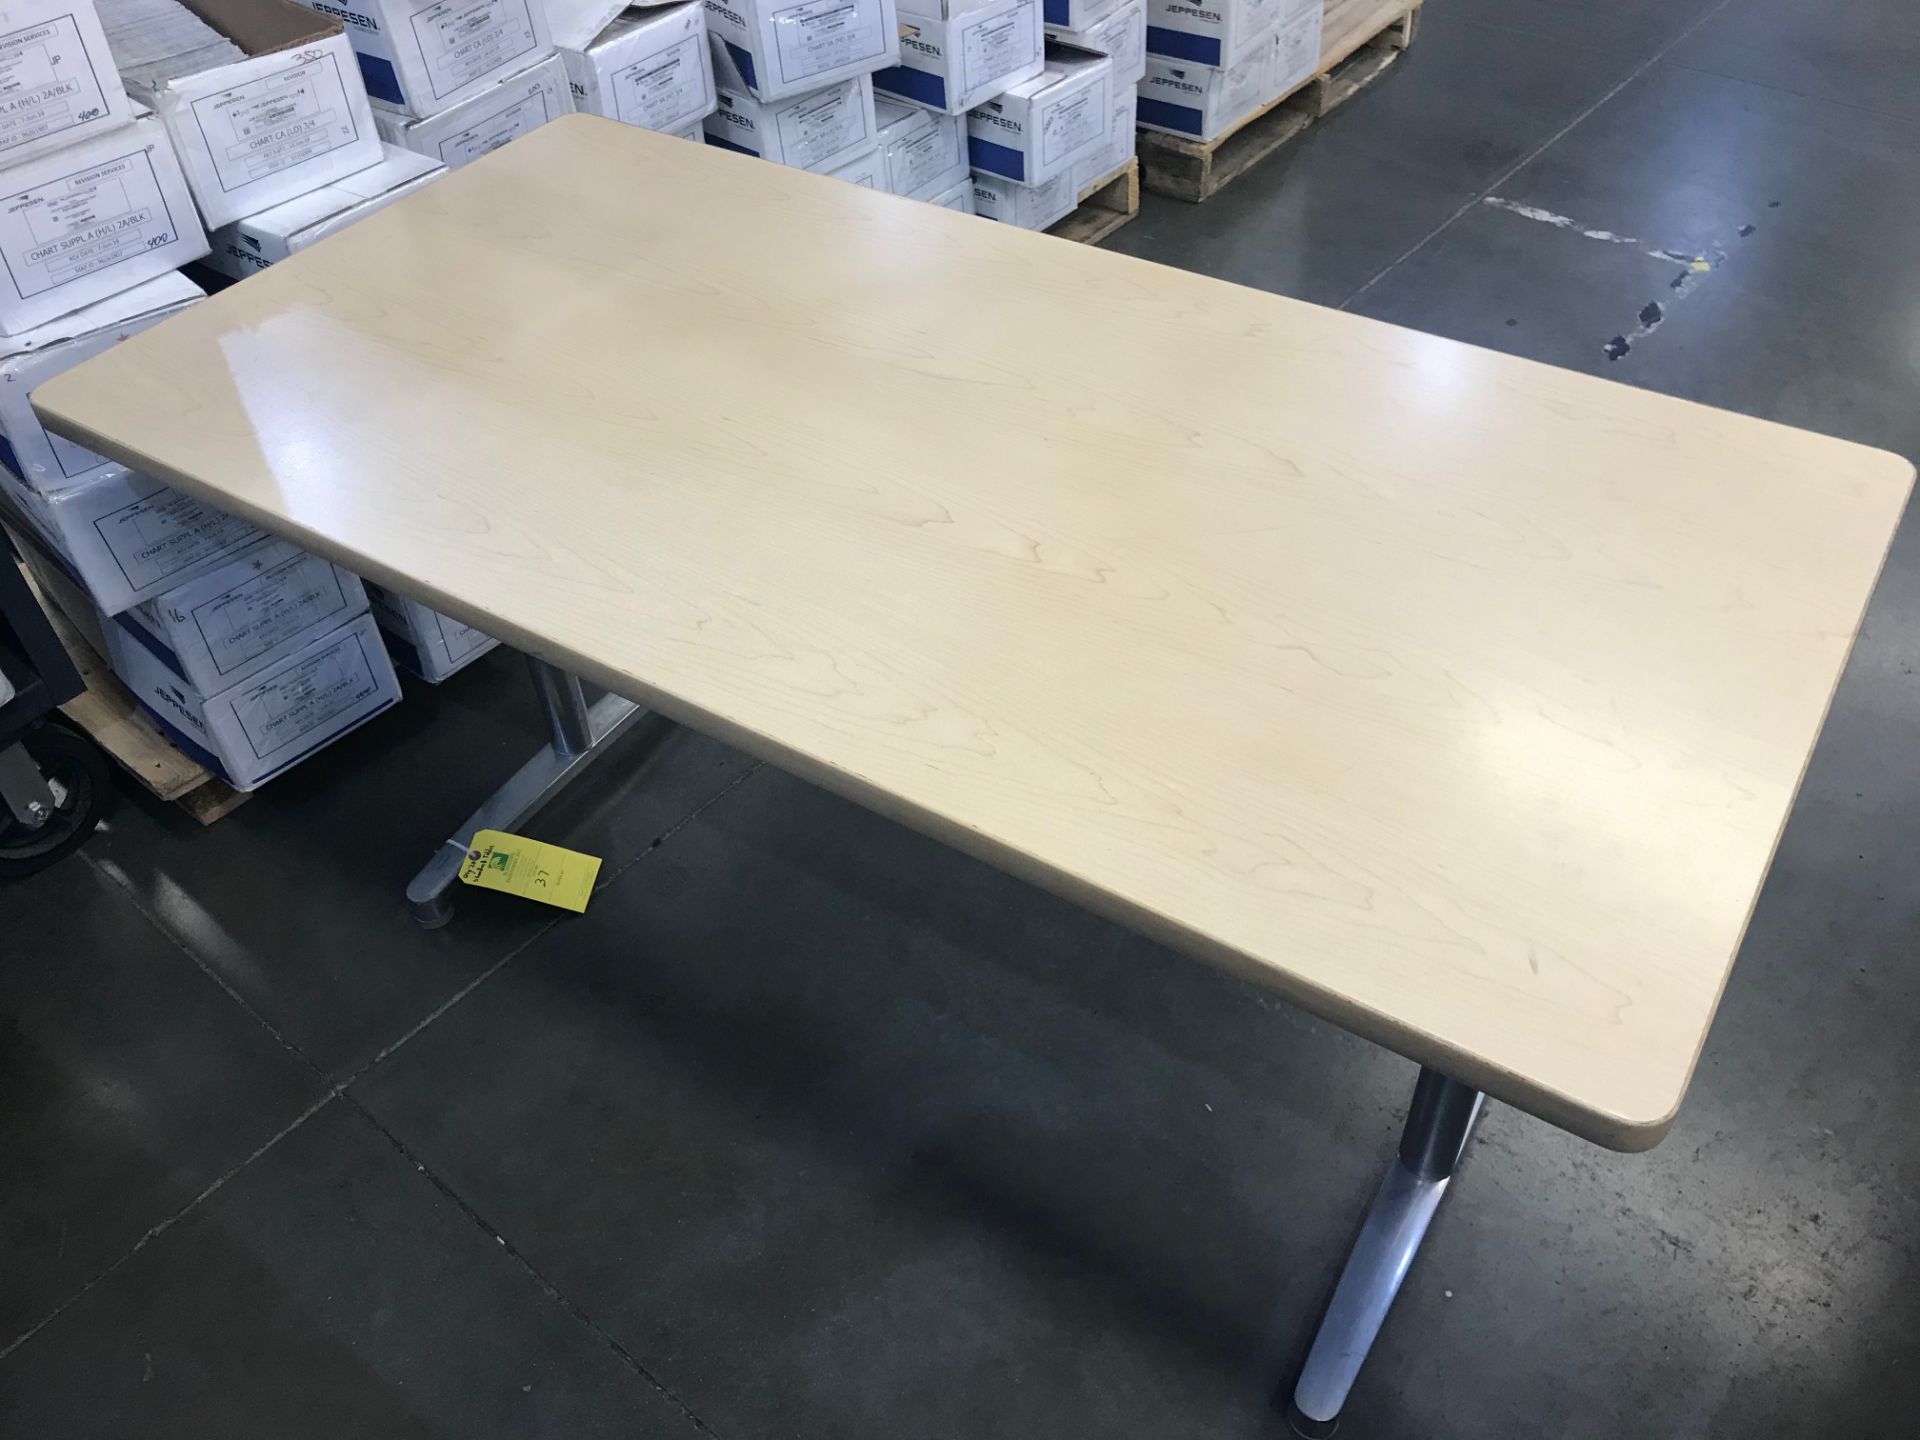 (20) Tables, 5 ft long x 30 in wide x 30 in tall, Removal Fee: $75